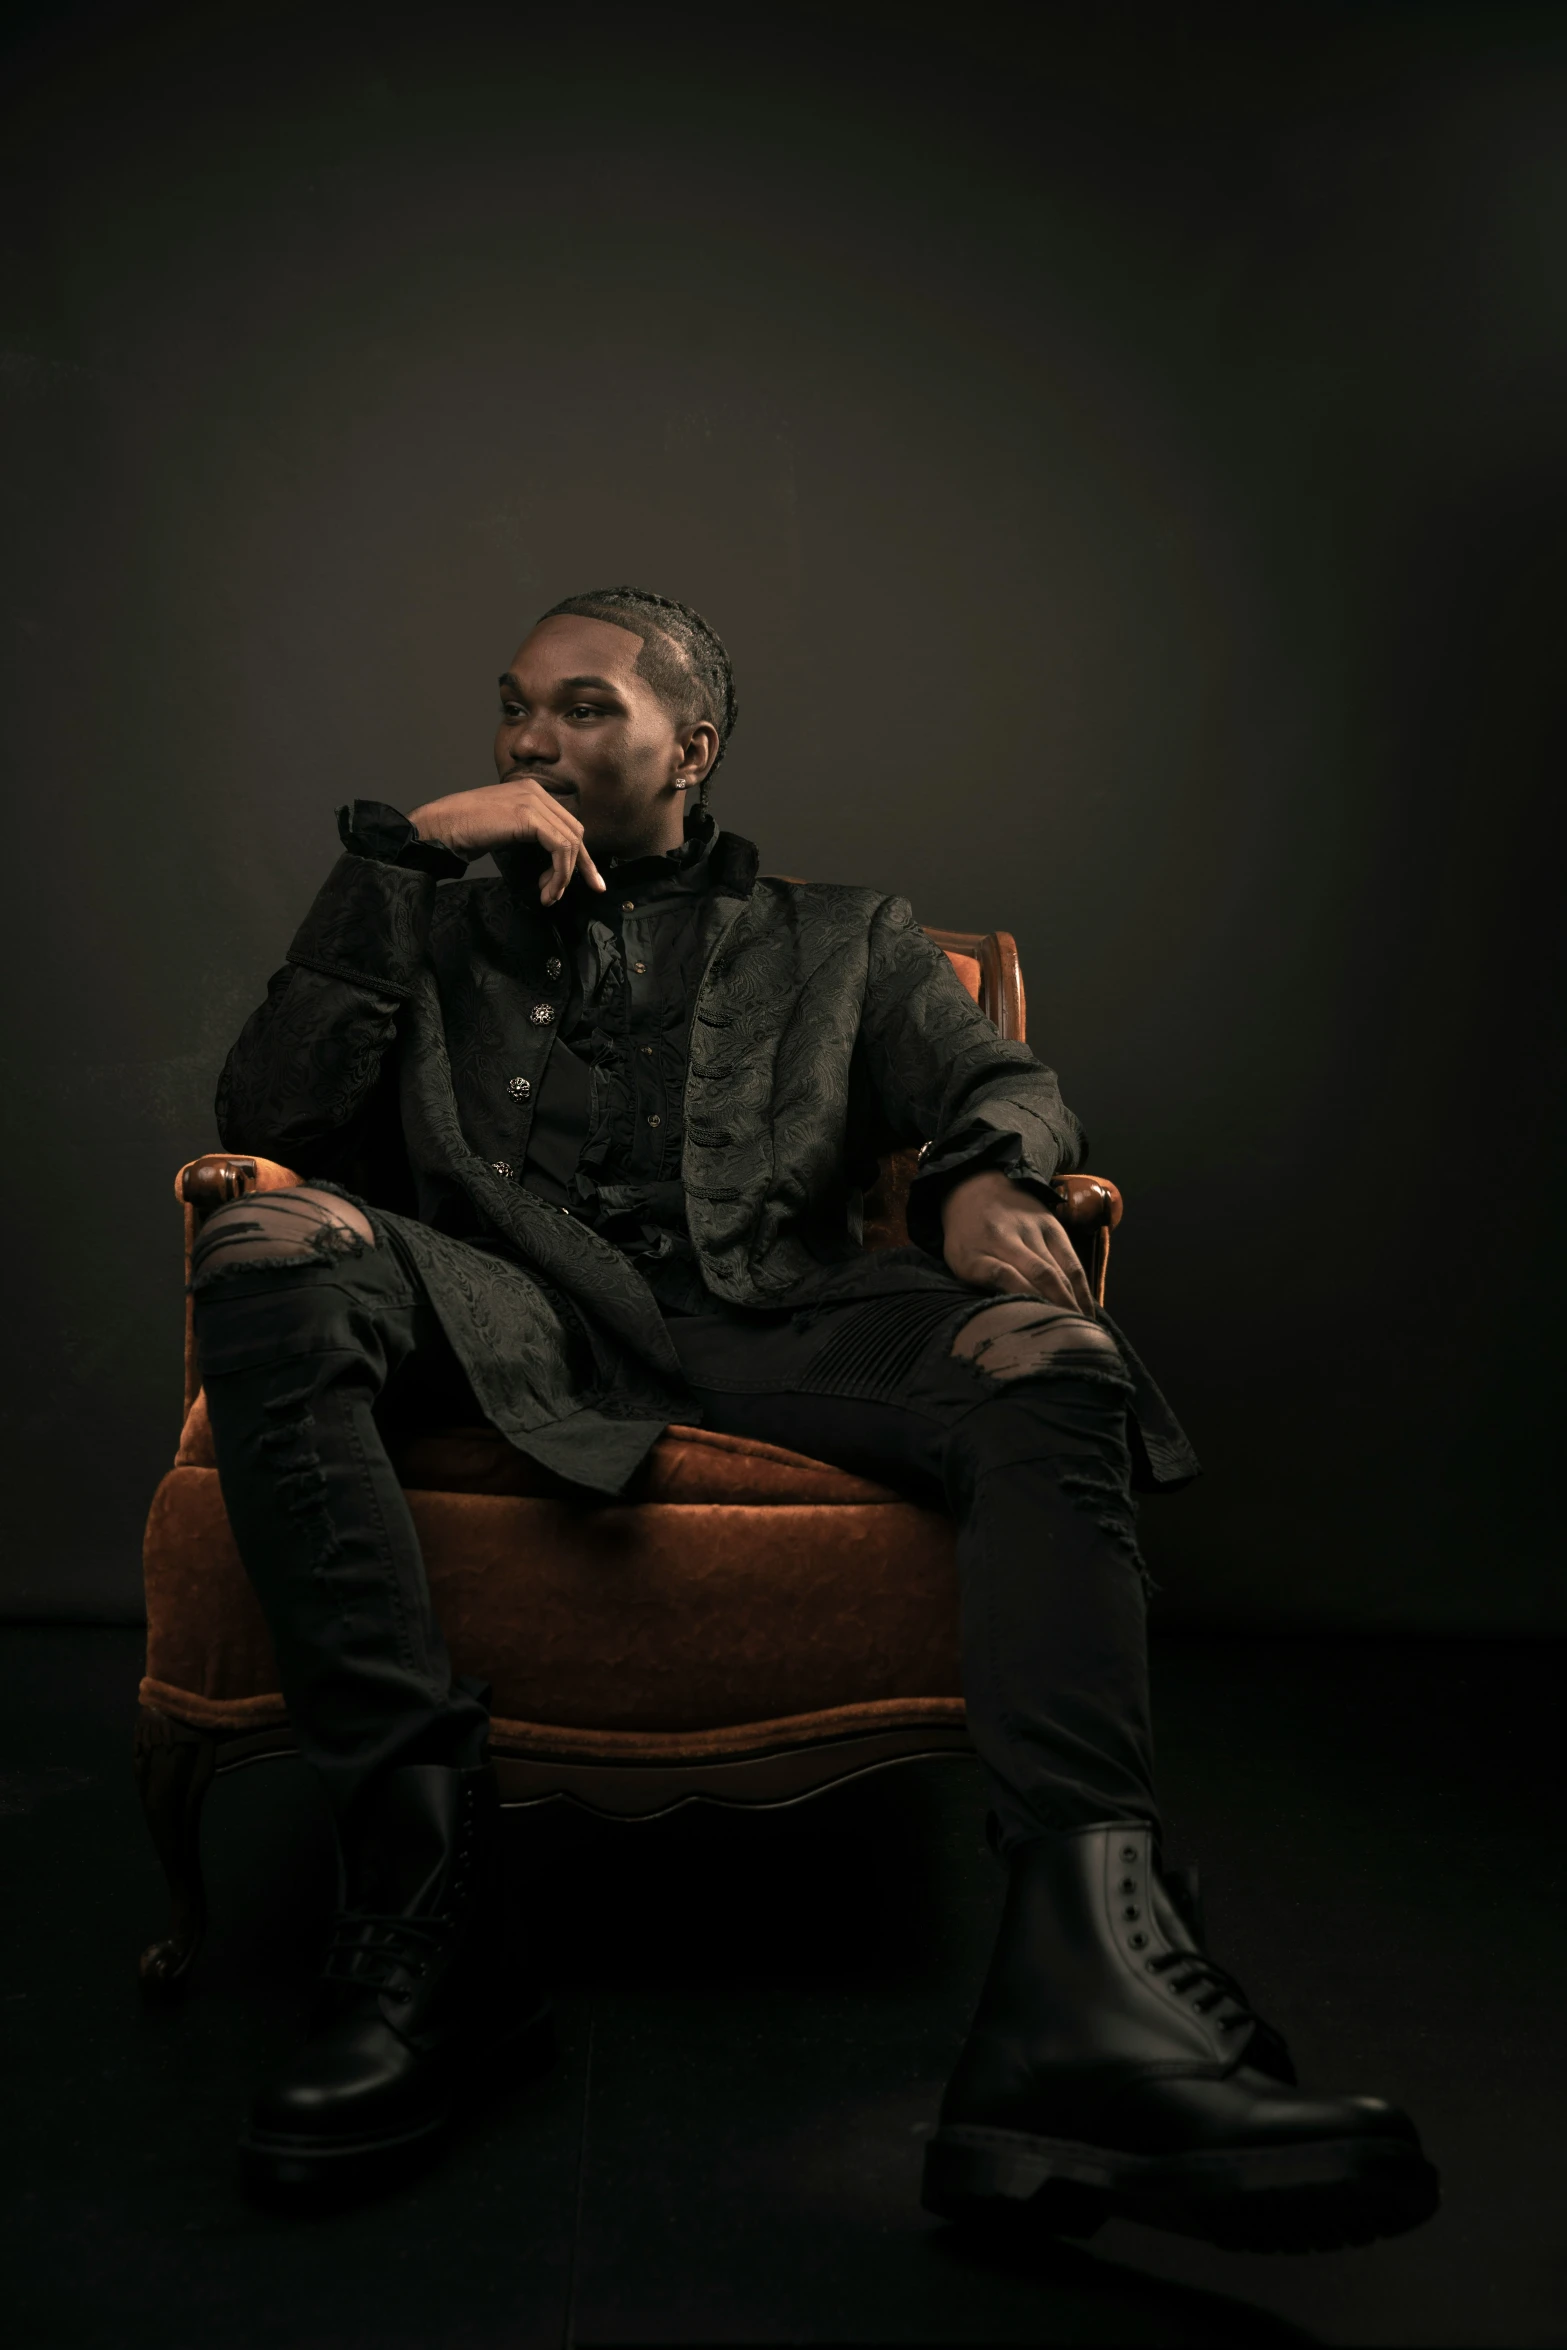 a man is posing for the camera while sitting on a brown chair